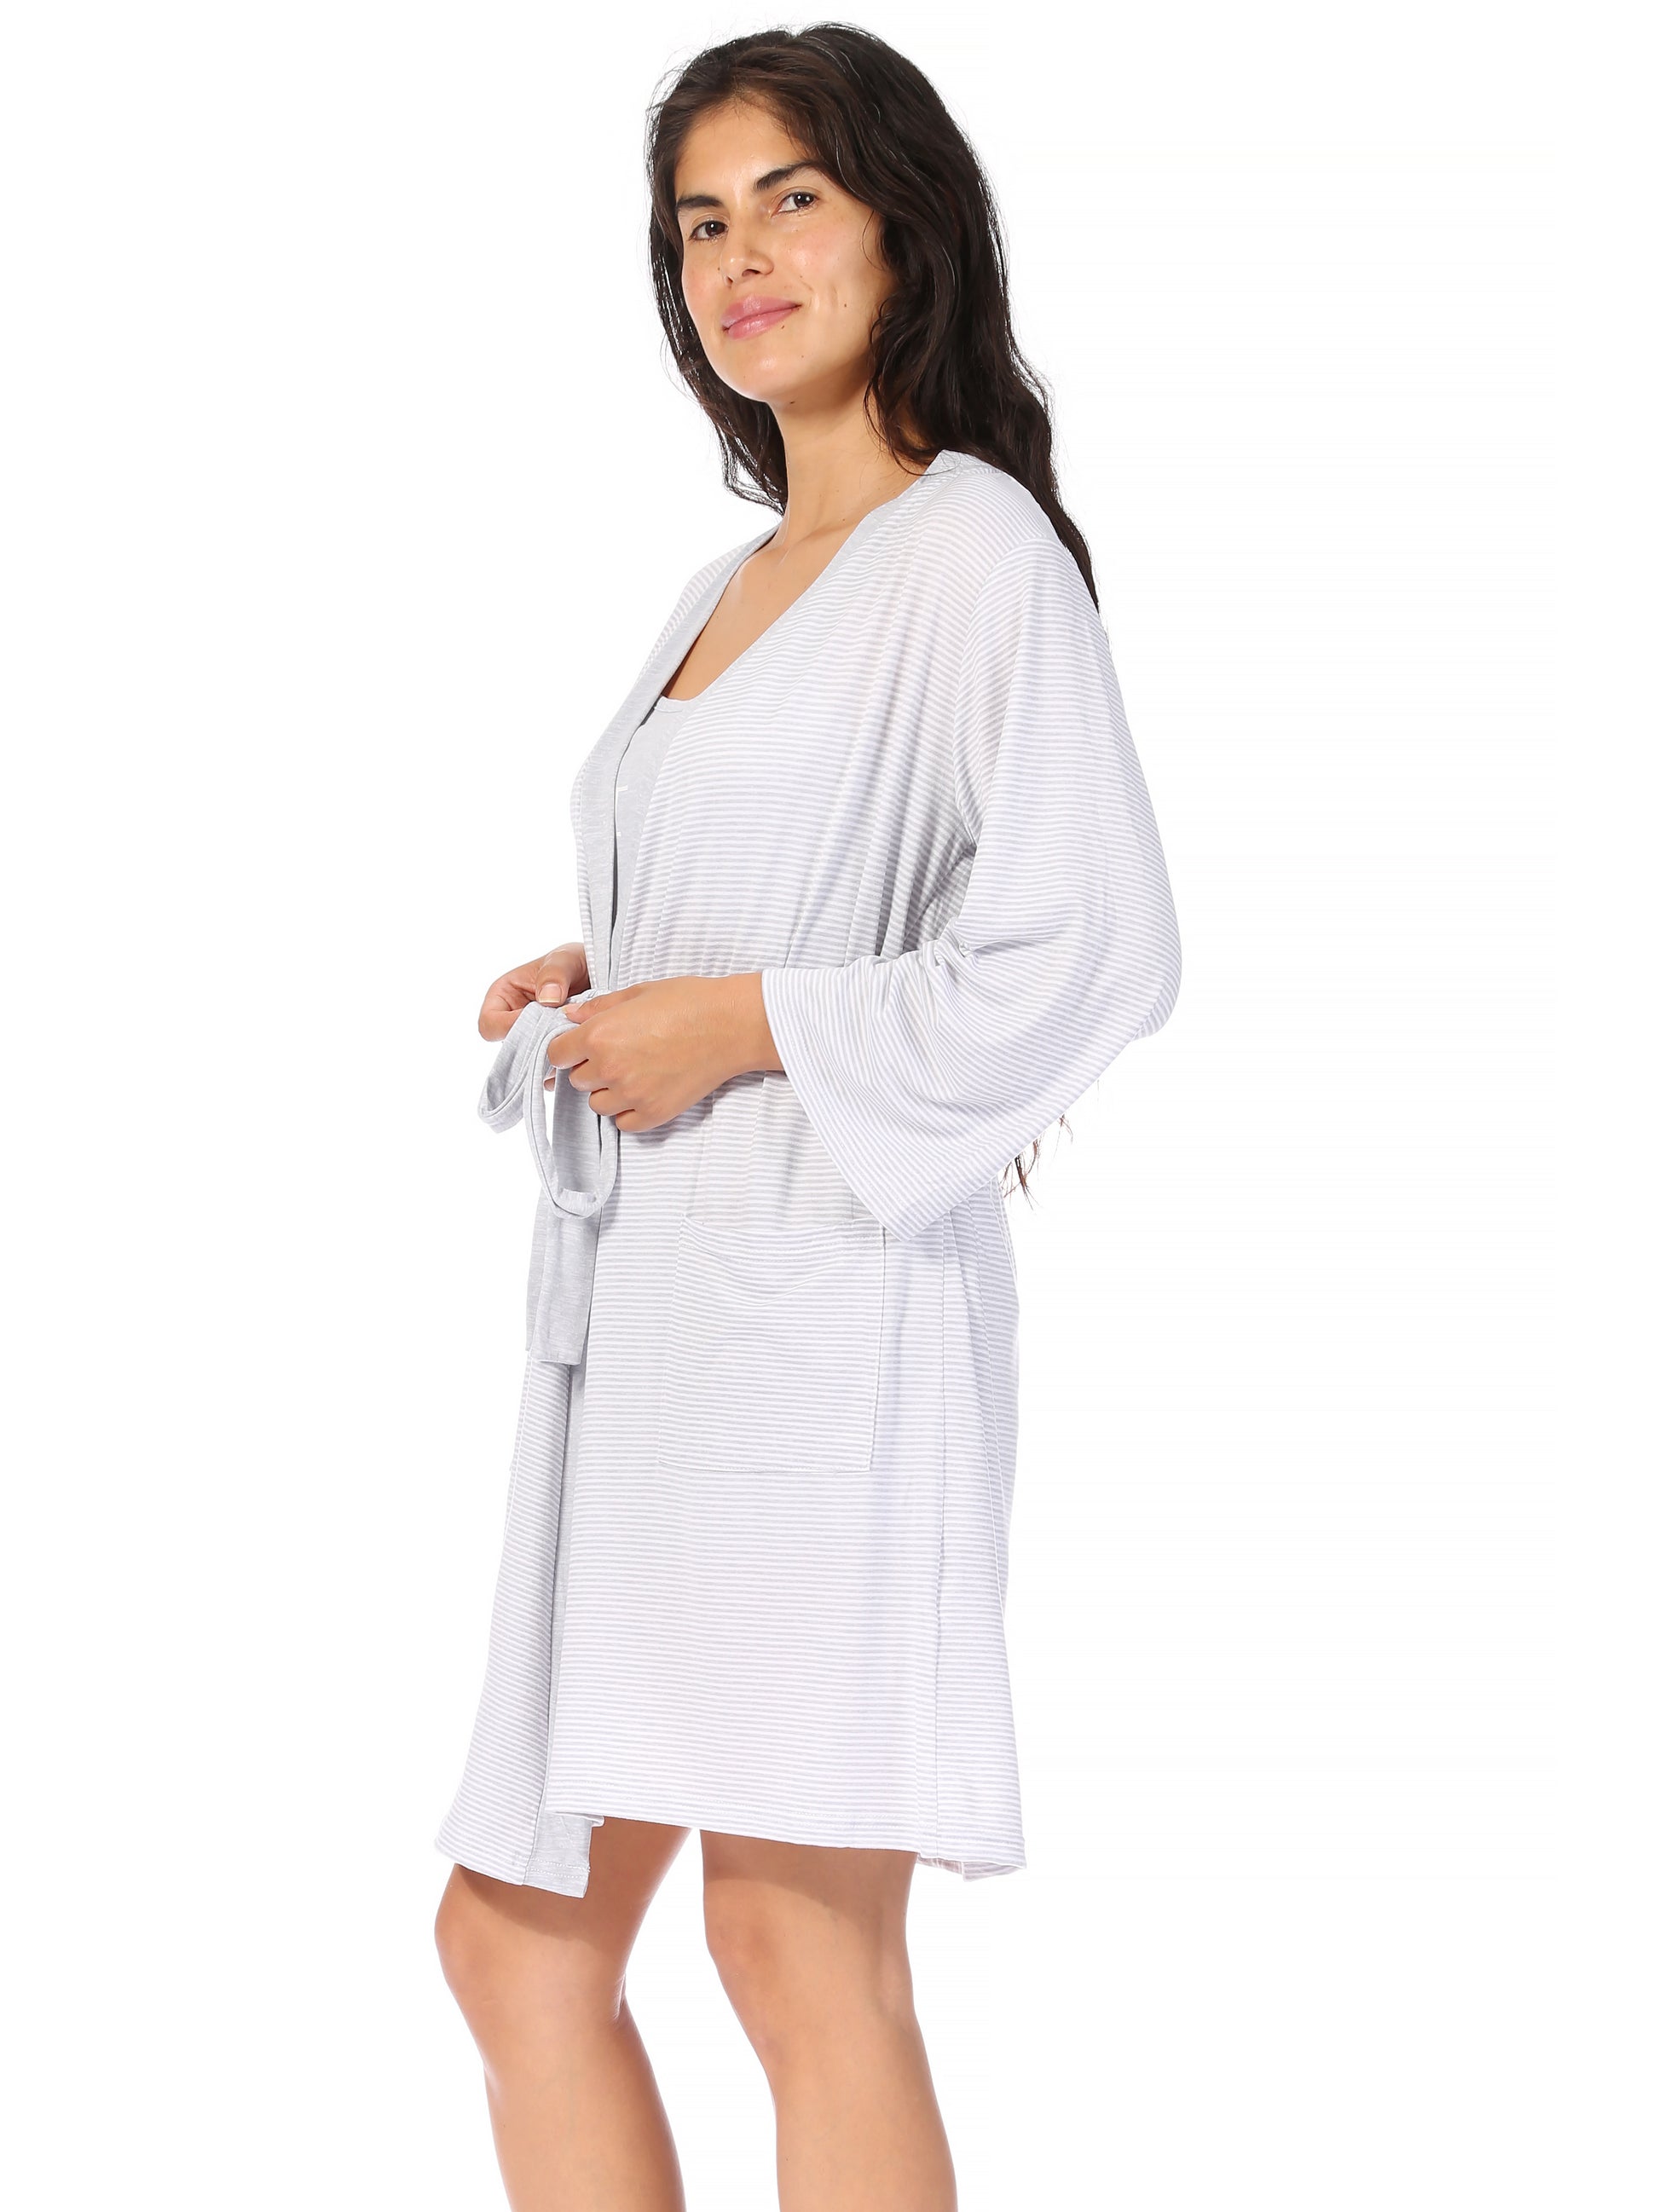 Women's DO NOT DISTURB 3-Piece Cami Shorts and Robe Travel